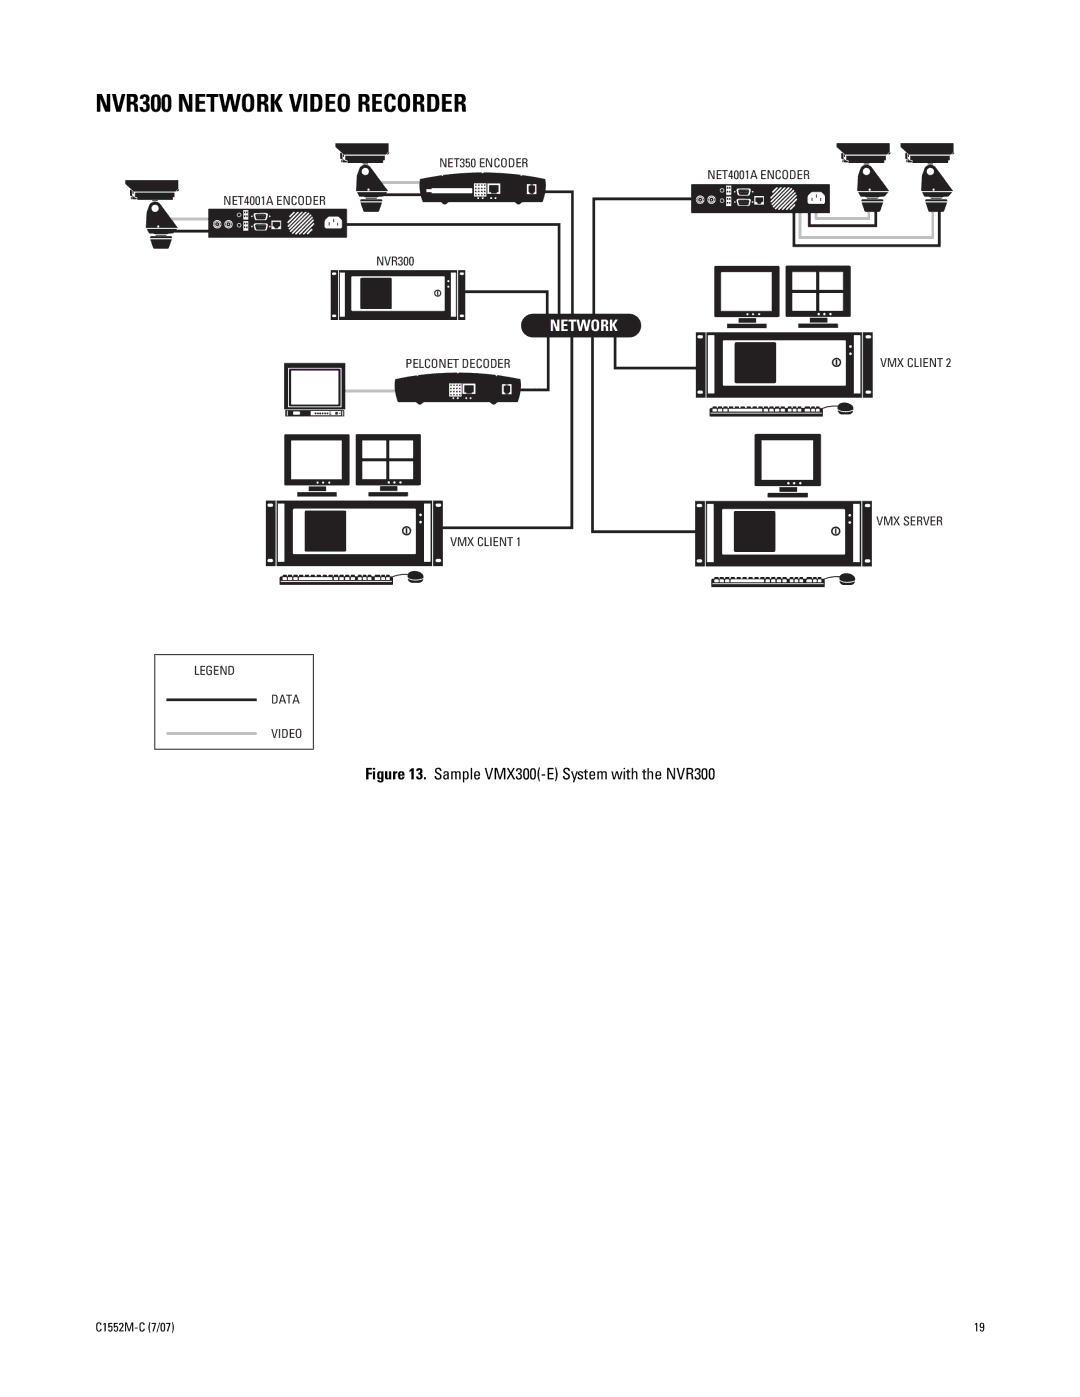 Pelco installation manual NVR300 Network Video Recorder, Sample VMX300-E System with the NVR300 